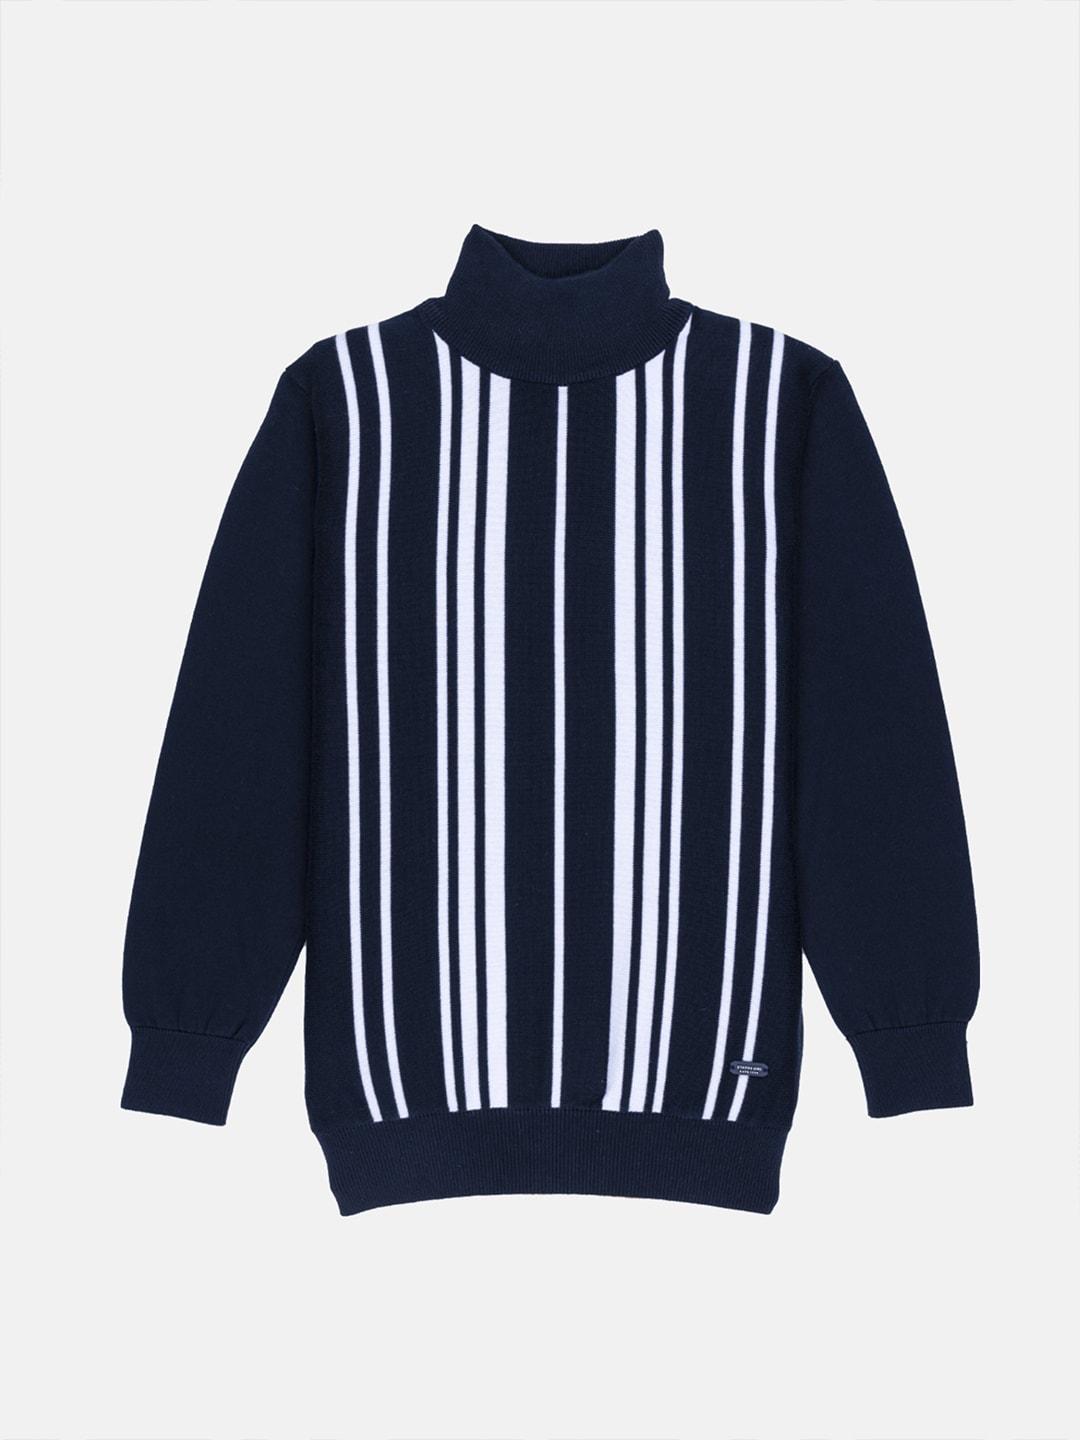 Status Quo Boys Navy Blue & White Striped Pullover